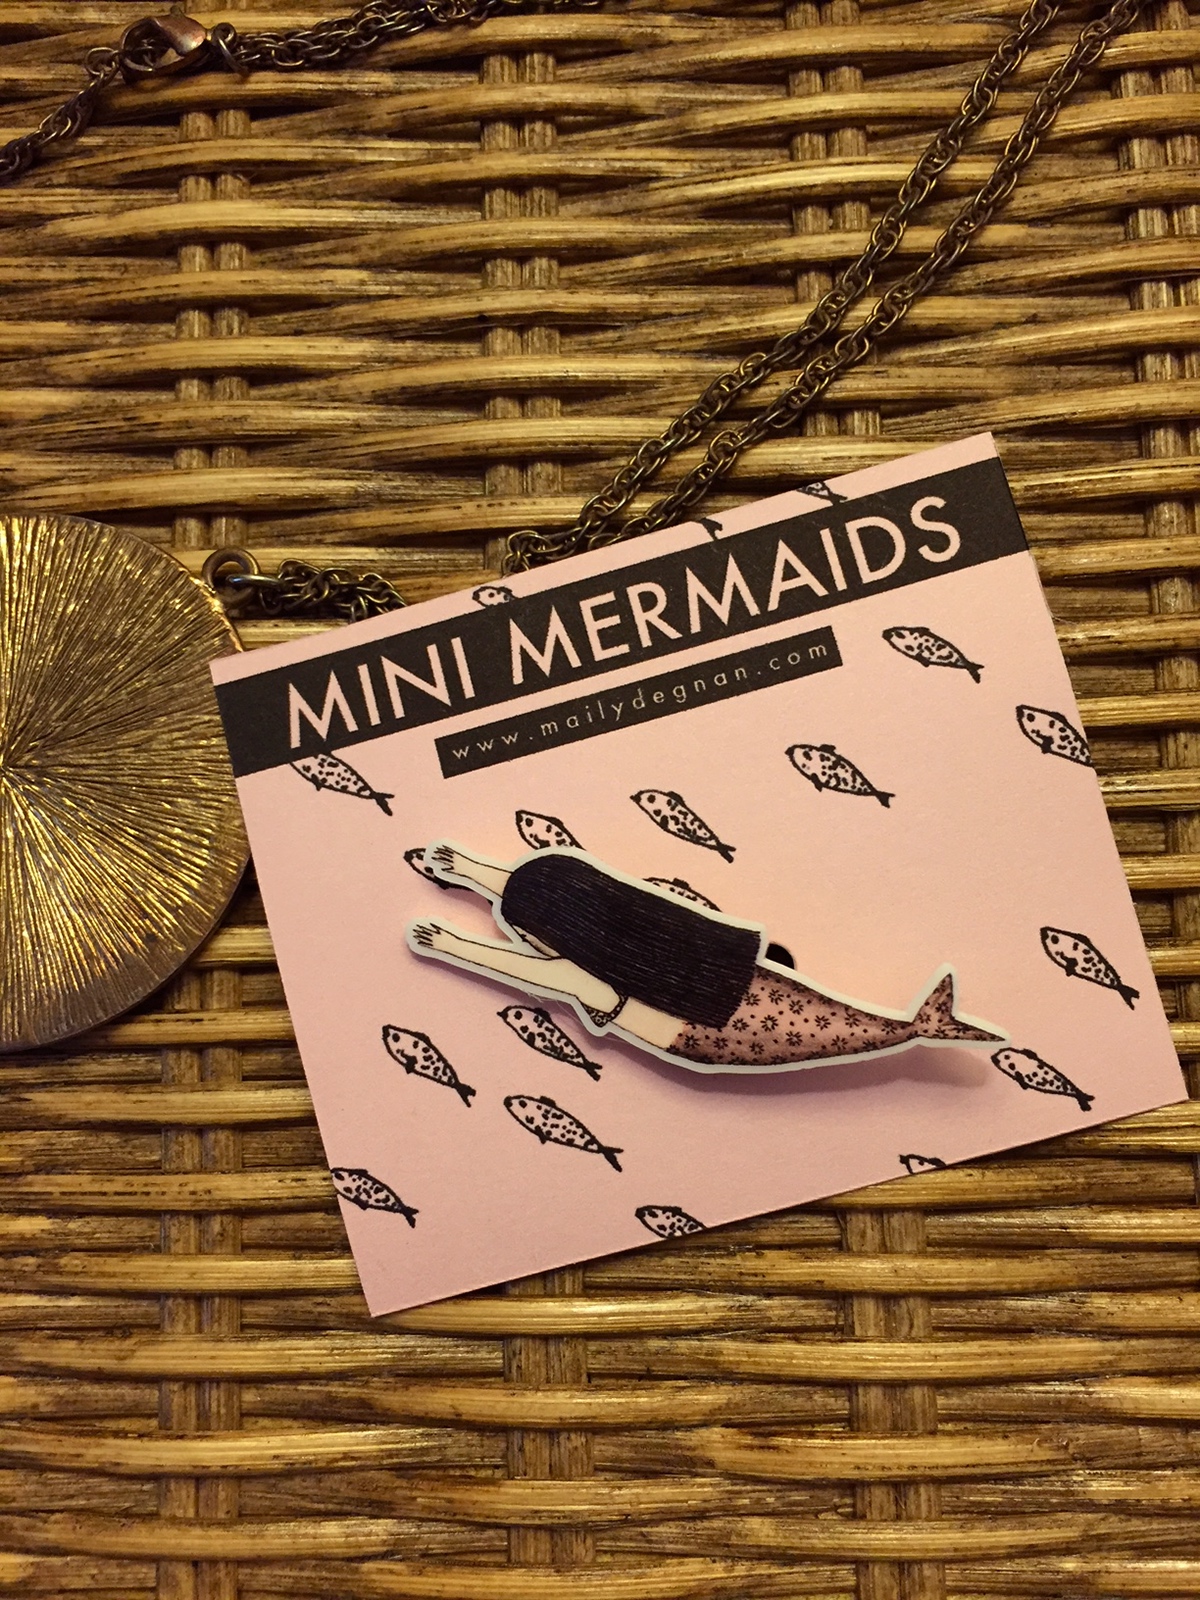 mermaids pins broaches illustrated gifts Miniature mini mermaid mini mermaid pin Ocean beach accessories